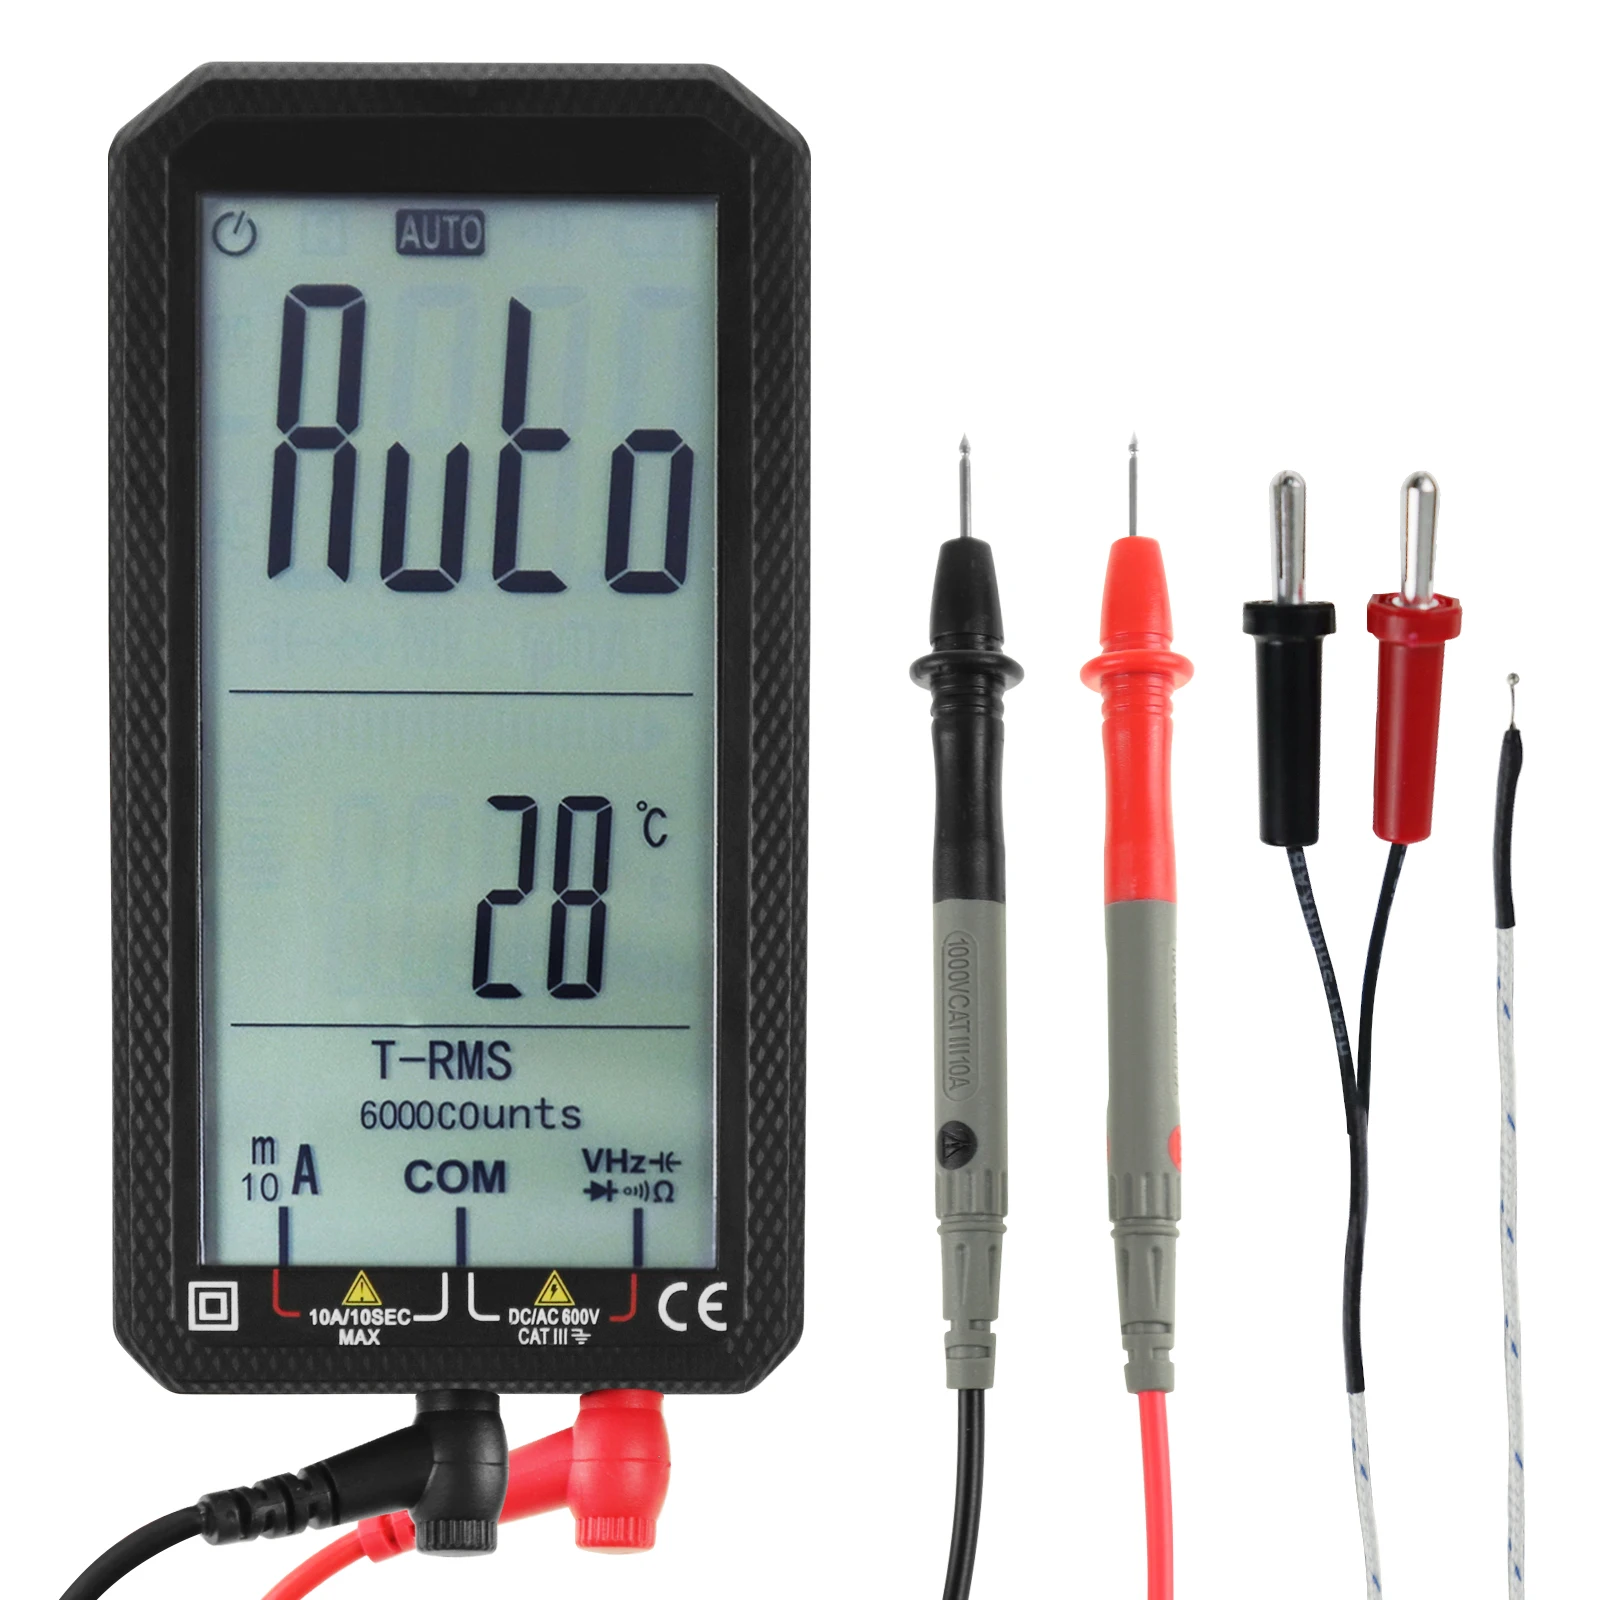 

Professional 6-in-1 T-RMS Digital Multimeter Voltage/ Current/ Resistance/ Frequency/ Capacitance/ Temperature Tester with Probe